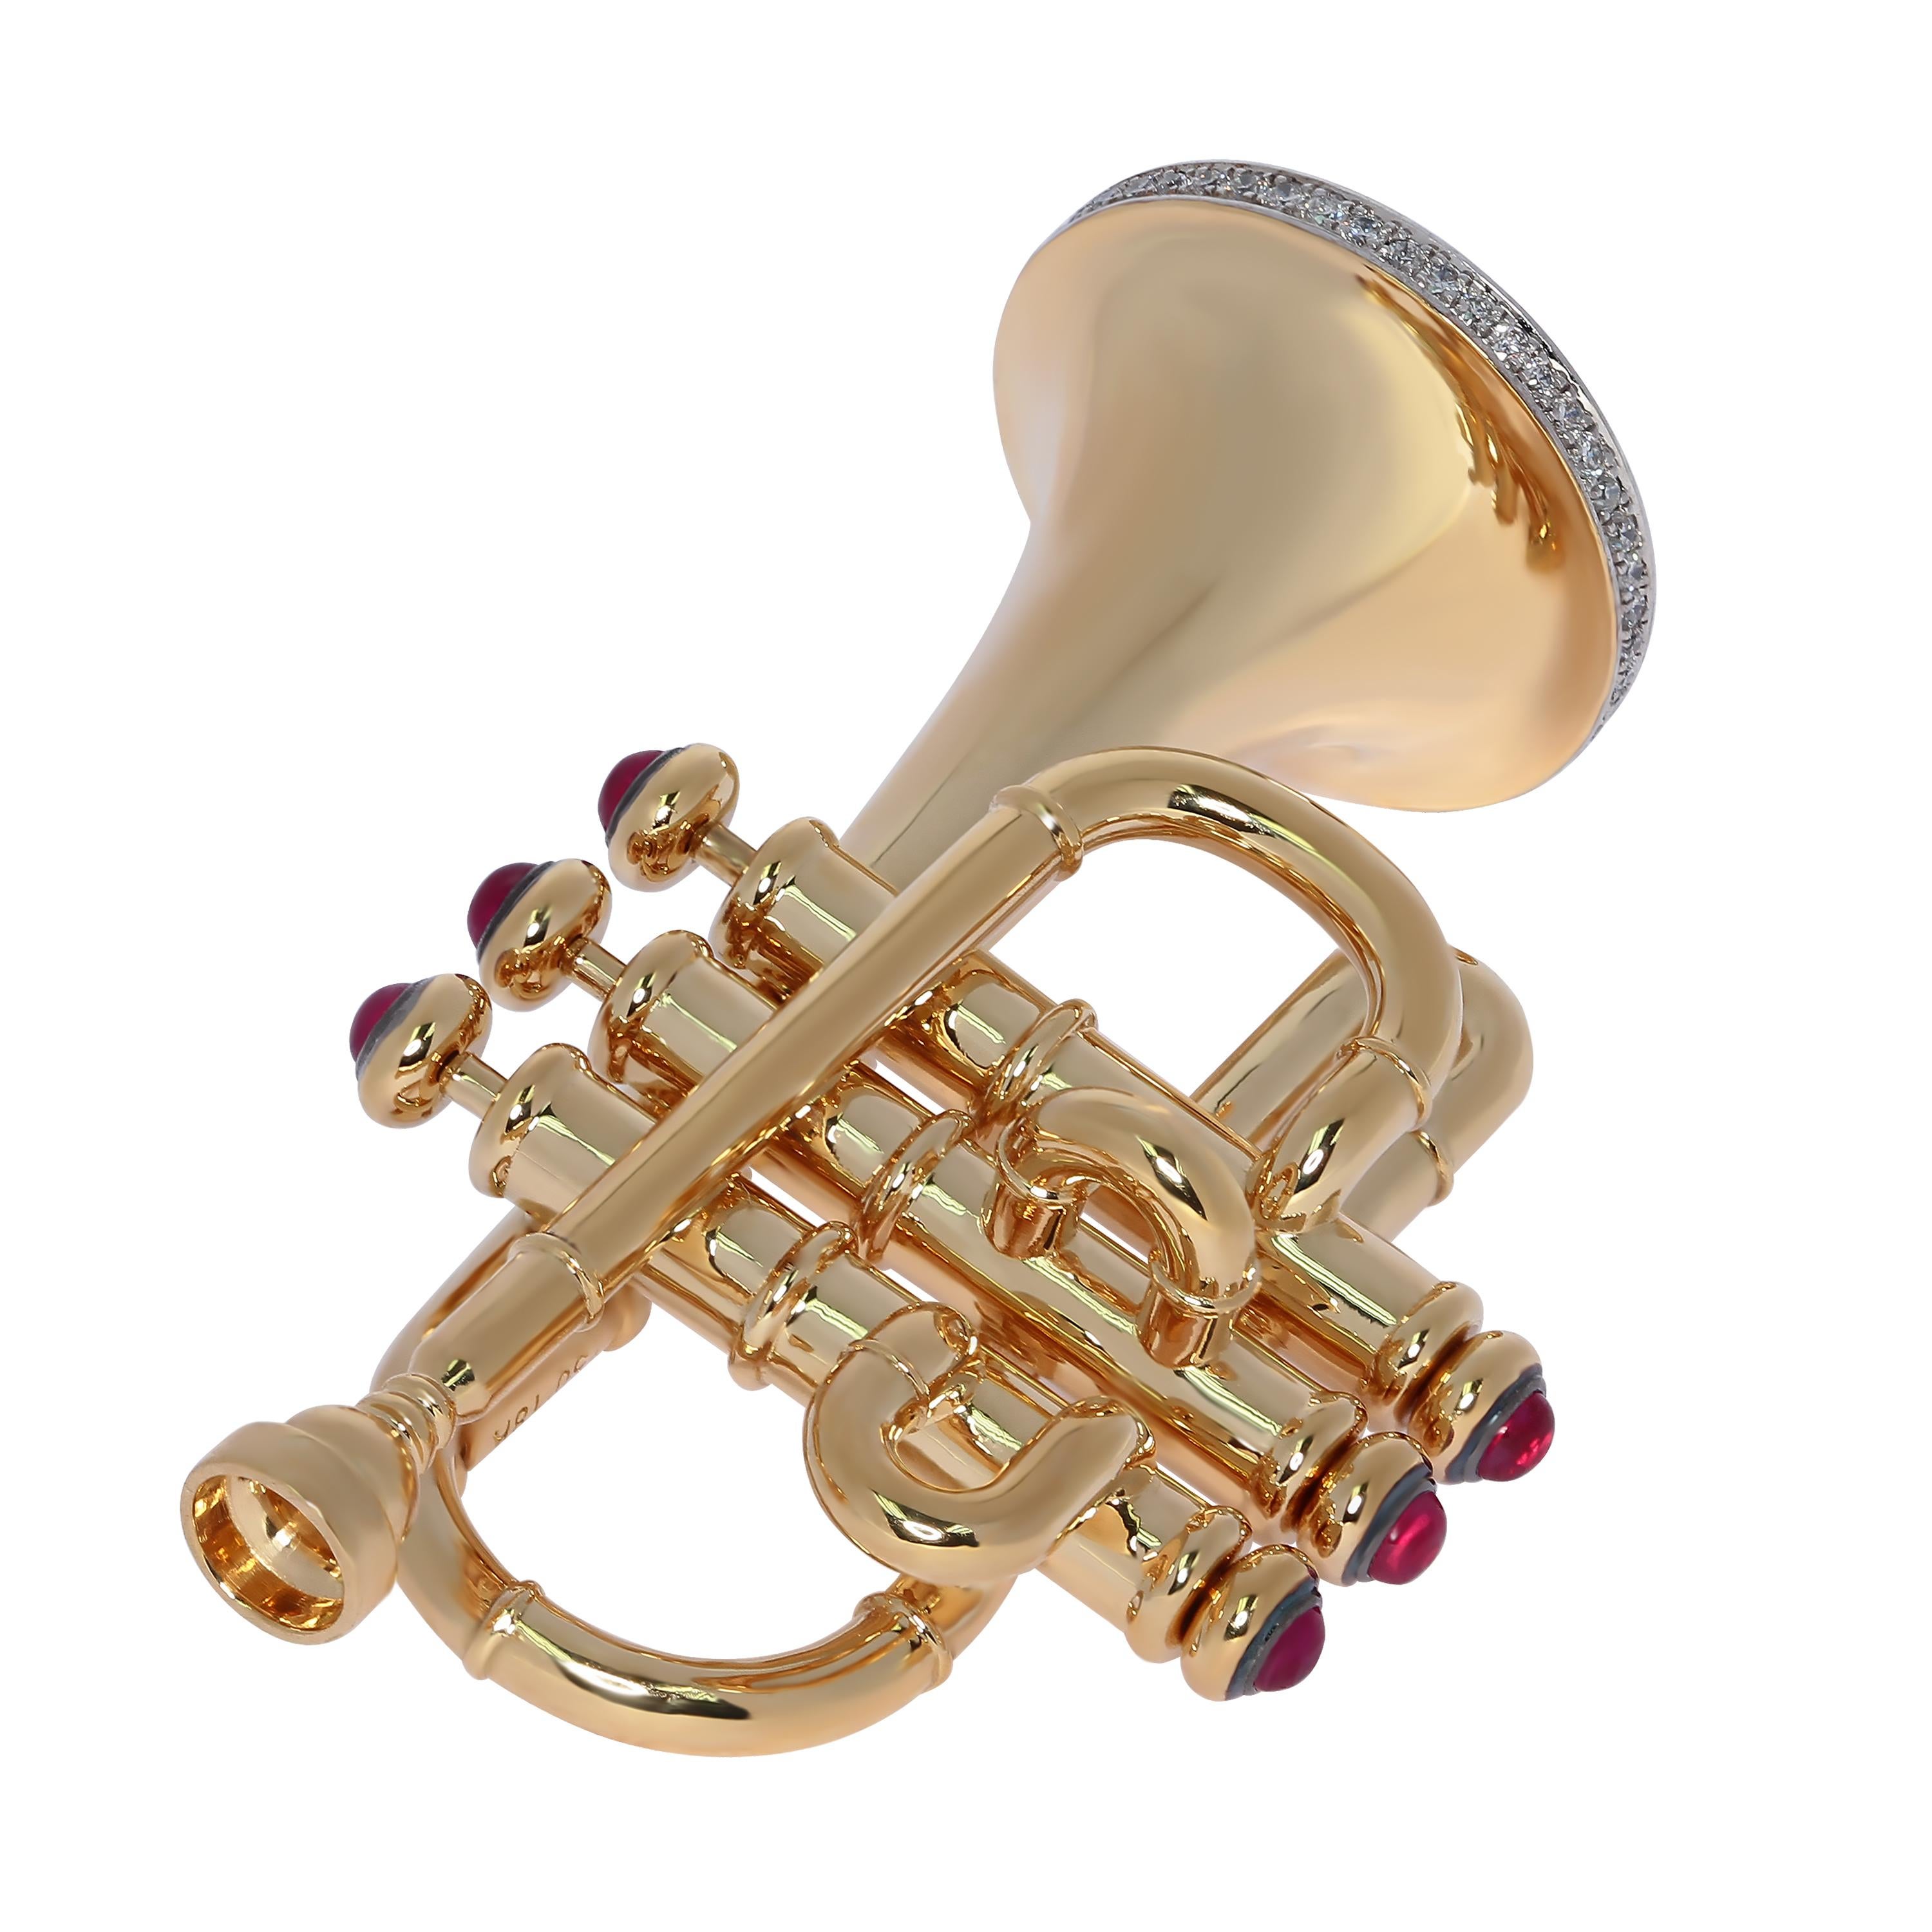 Diamond Ruby 18 Karat Yellow Gold Trumpet Brooch

This sophisticated 18 Karat Yellow Gold Brooch from our Artistic Collection brims with luxurious character and charm, captivating with its movable buttons, Ruby and Diamonds, and music notes flinging